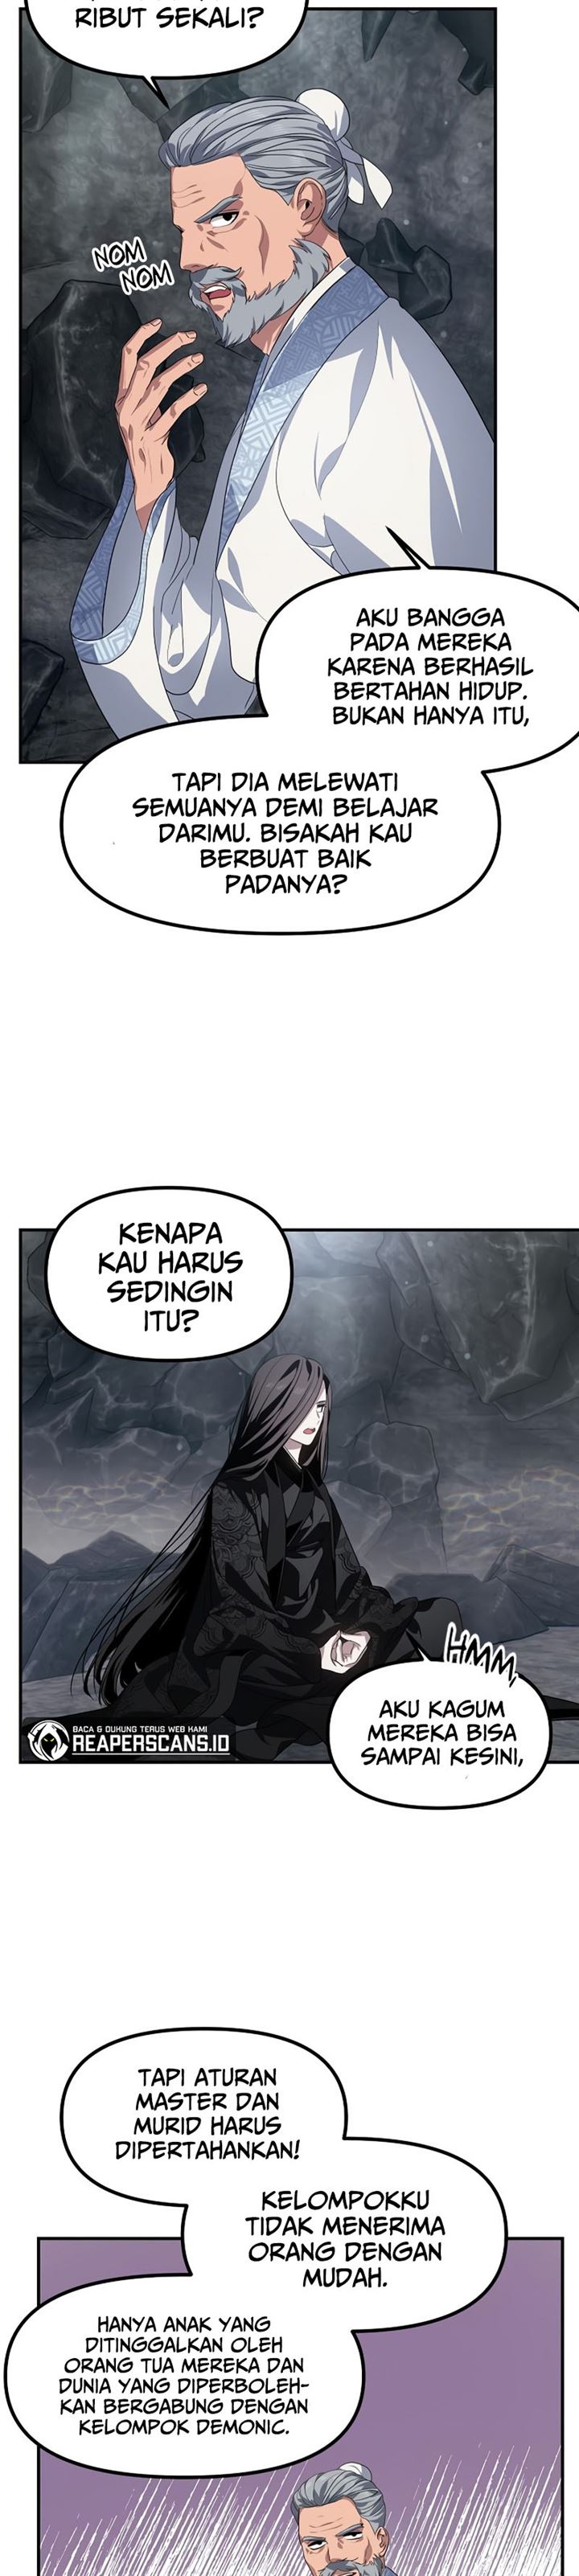 SSS-Class Suicide Hunter Chapter 62